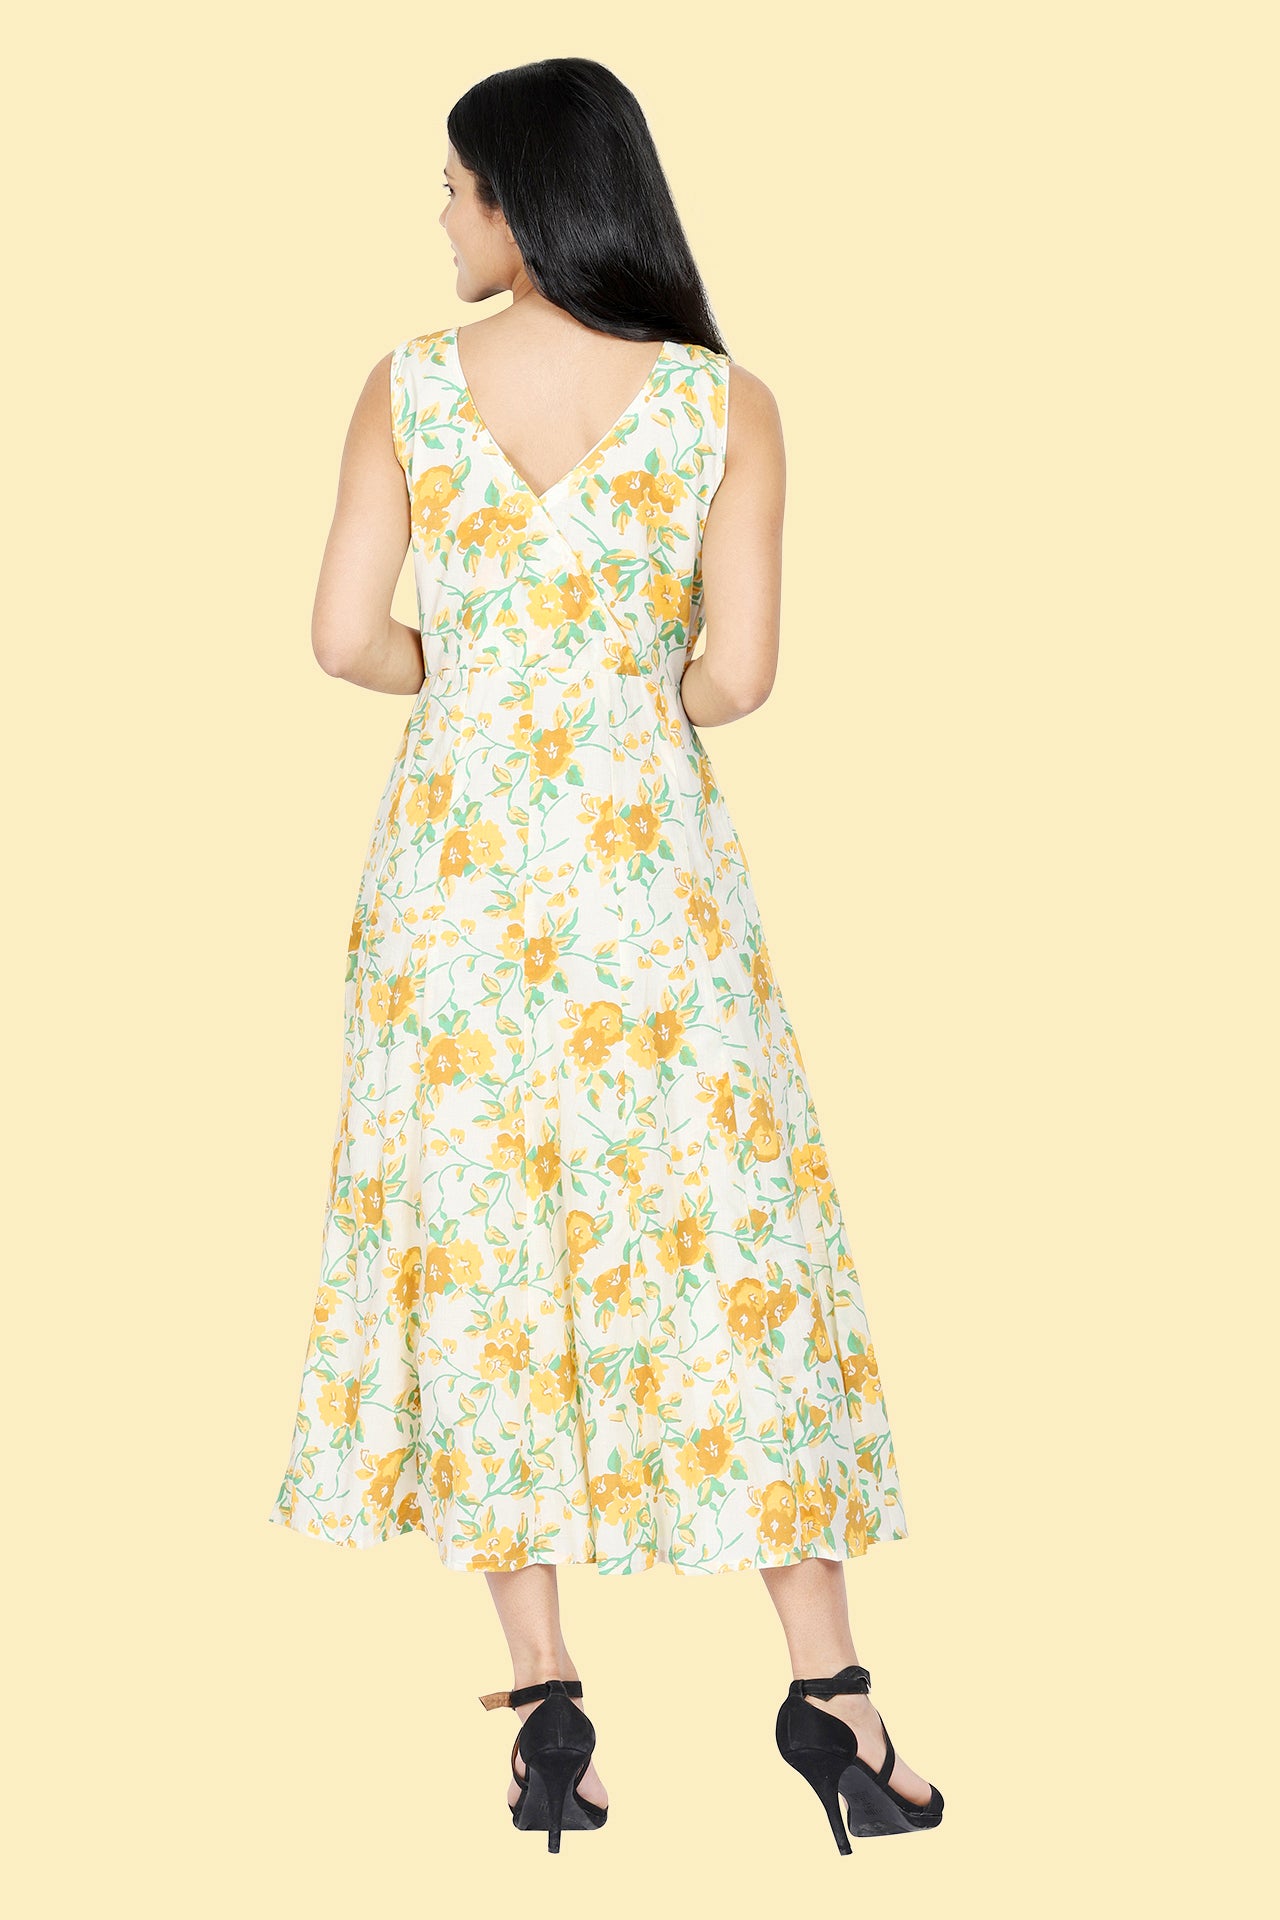 AMODINI WHITE AND YELLOW FLORAL DRESS